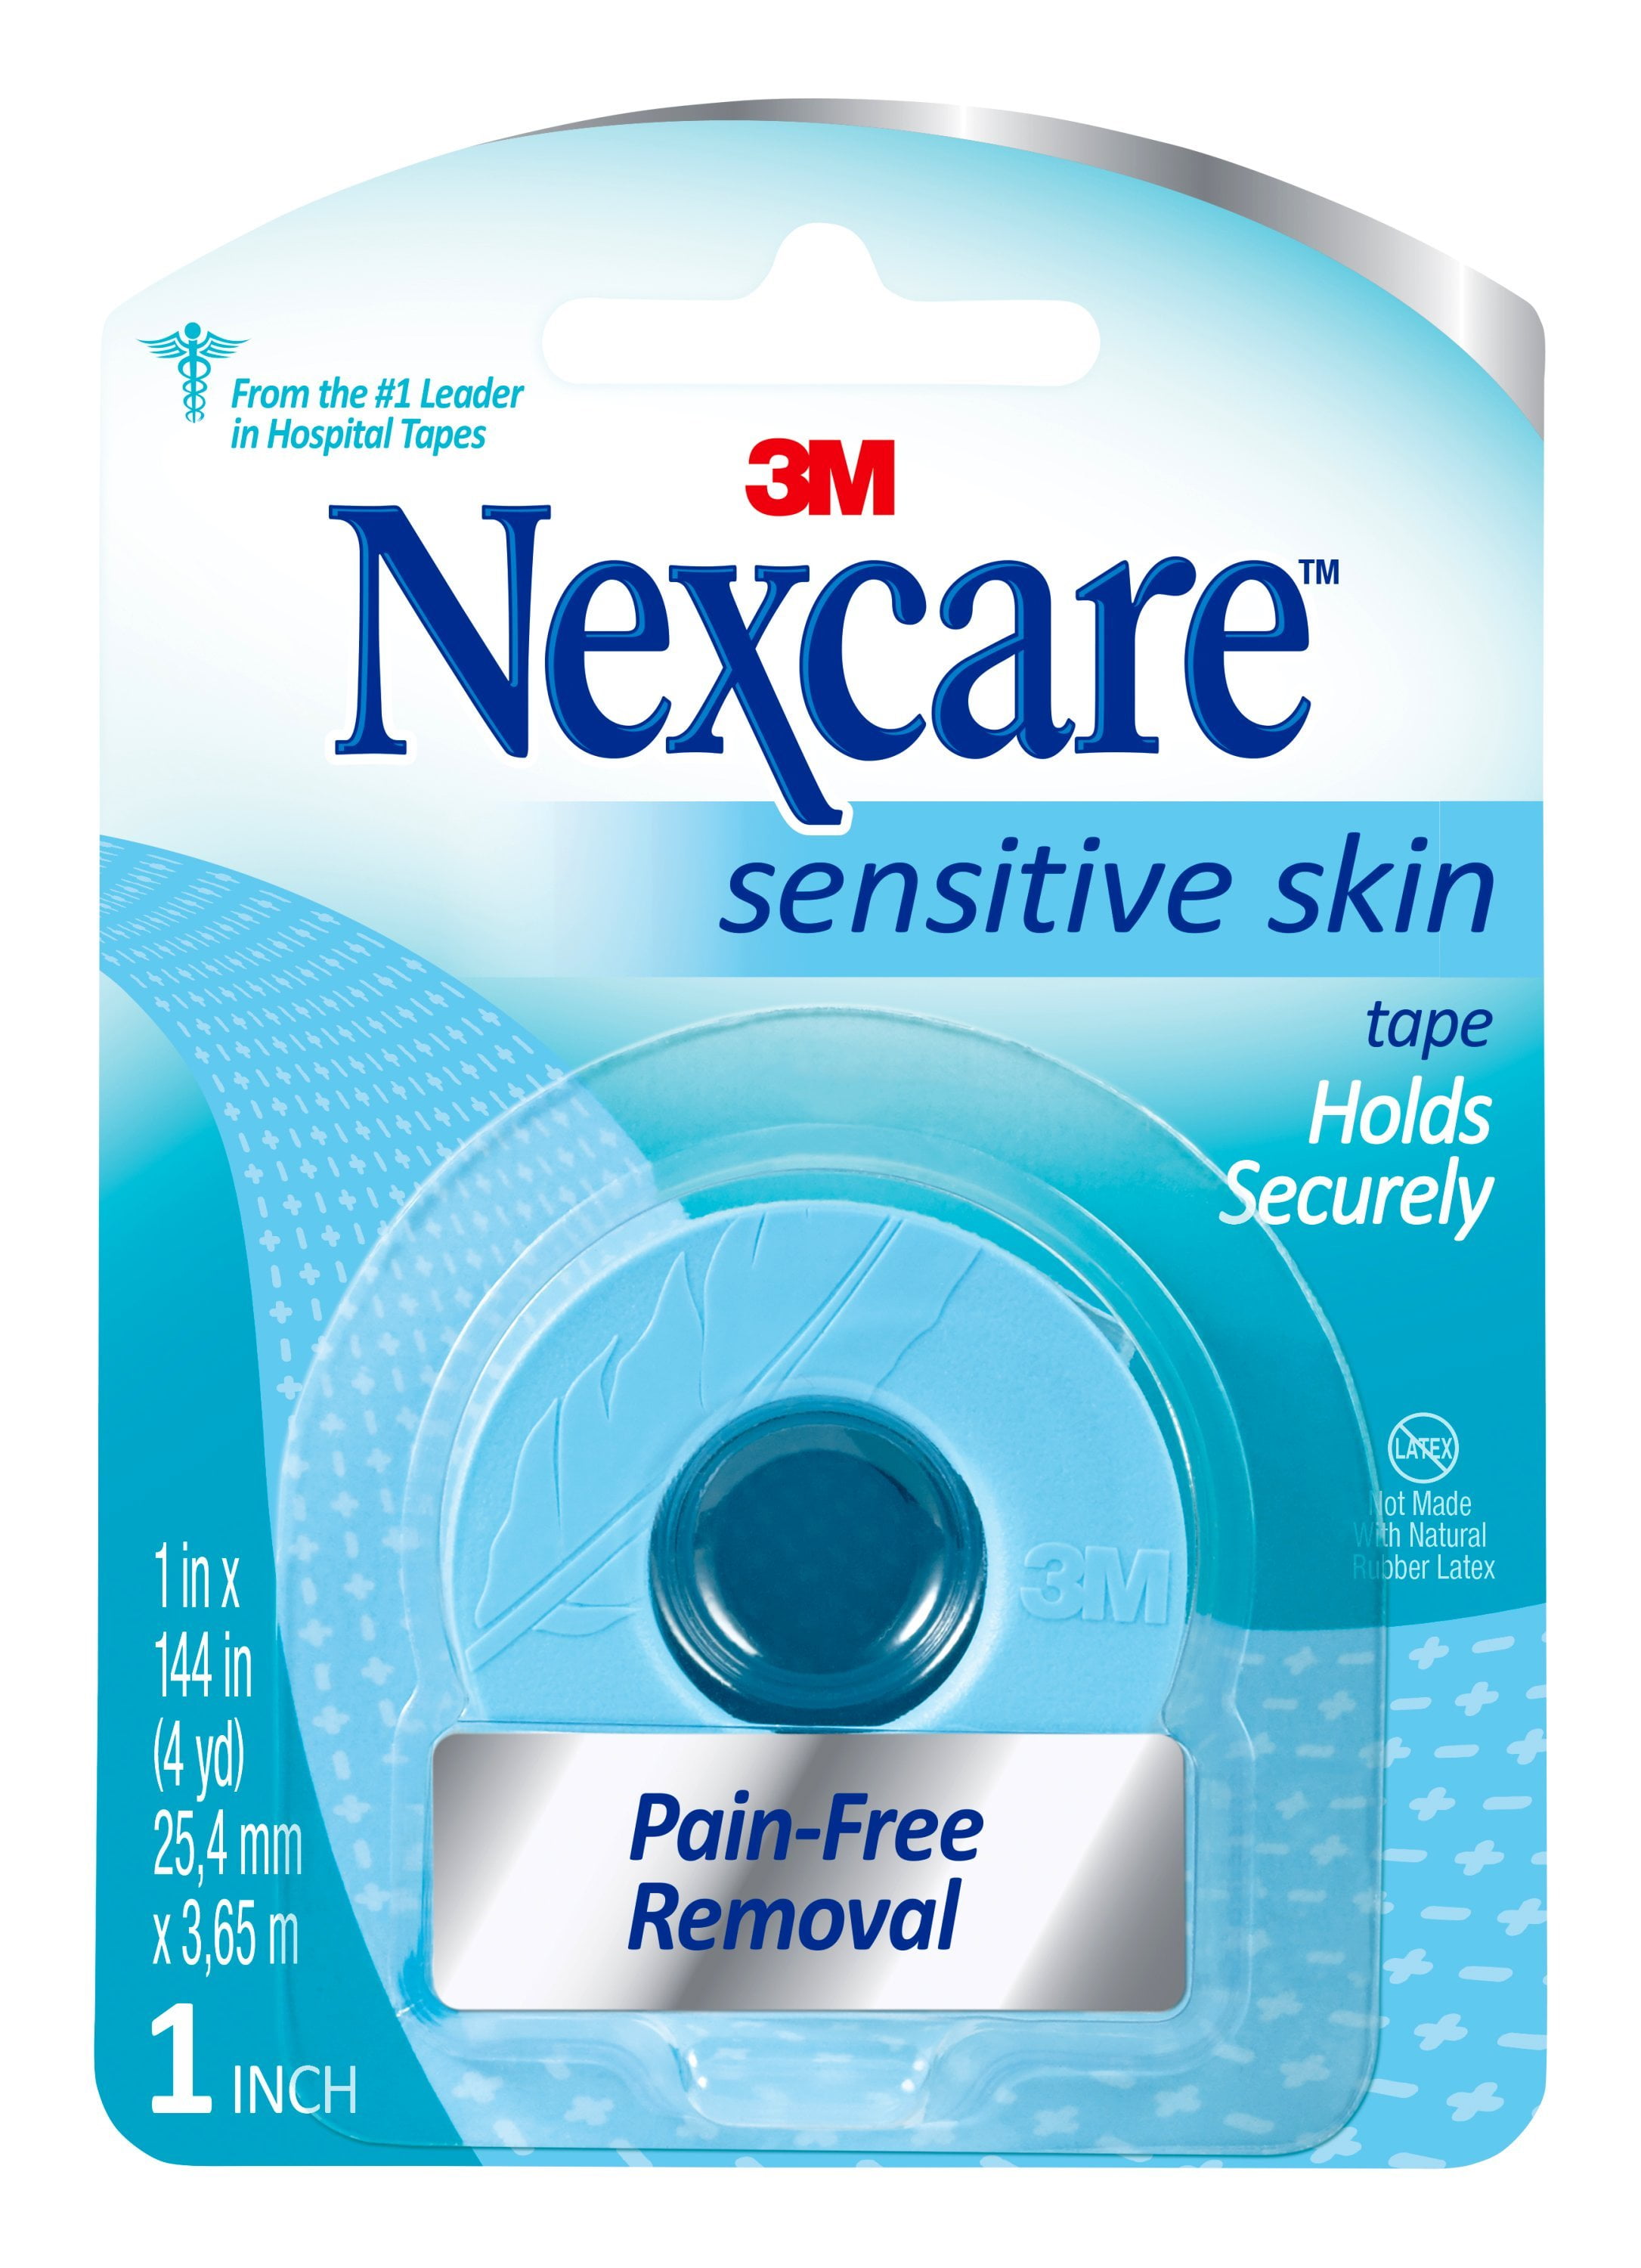 Nexcare 3M Strong Hold Pain-Free Removal Tape, 1 in x 4 yd - Kroger